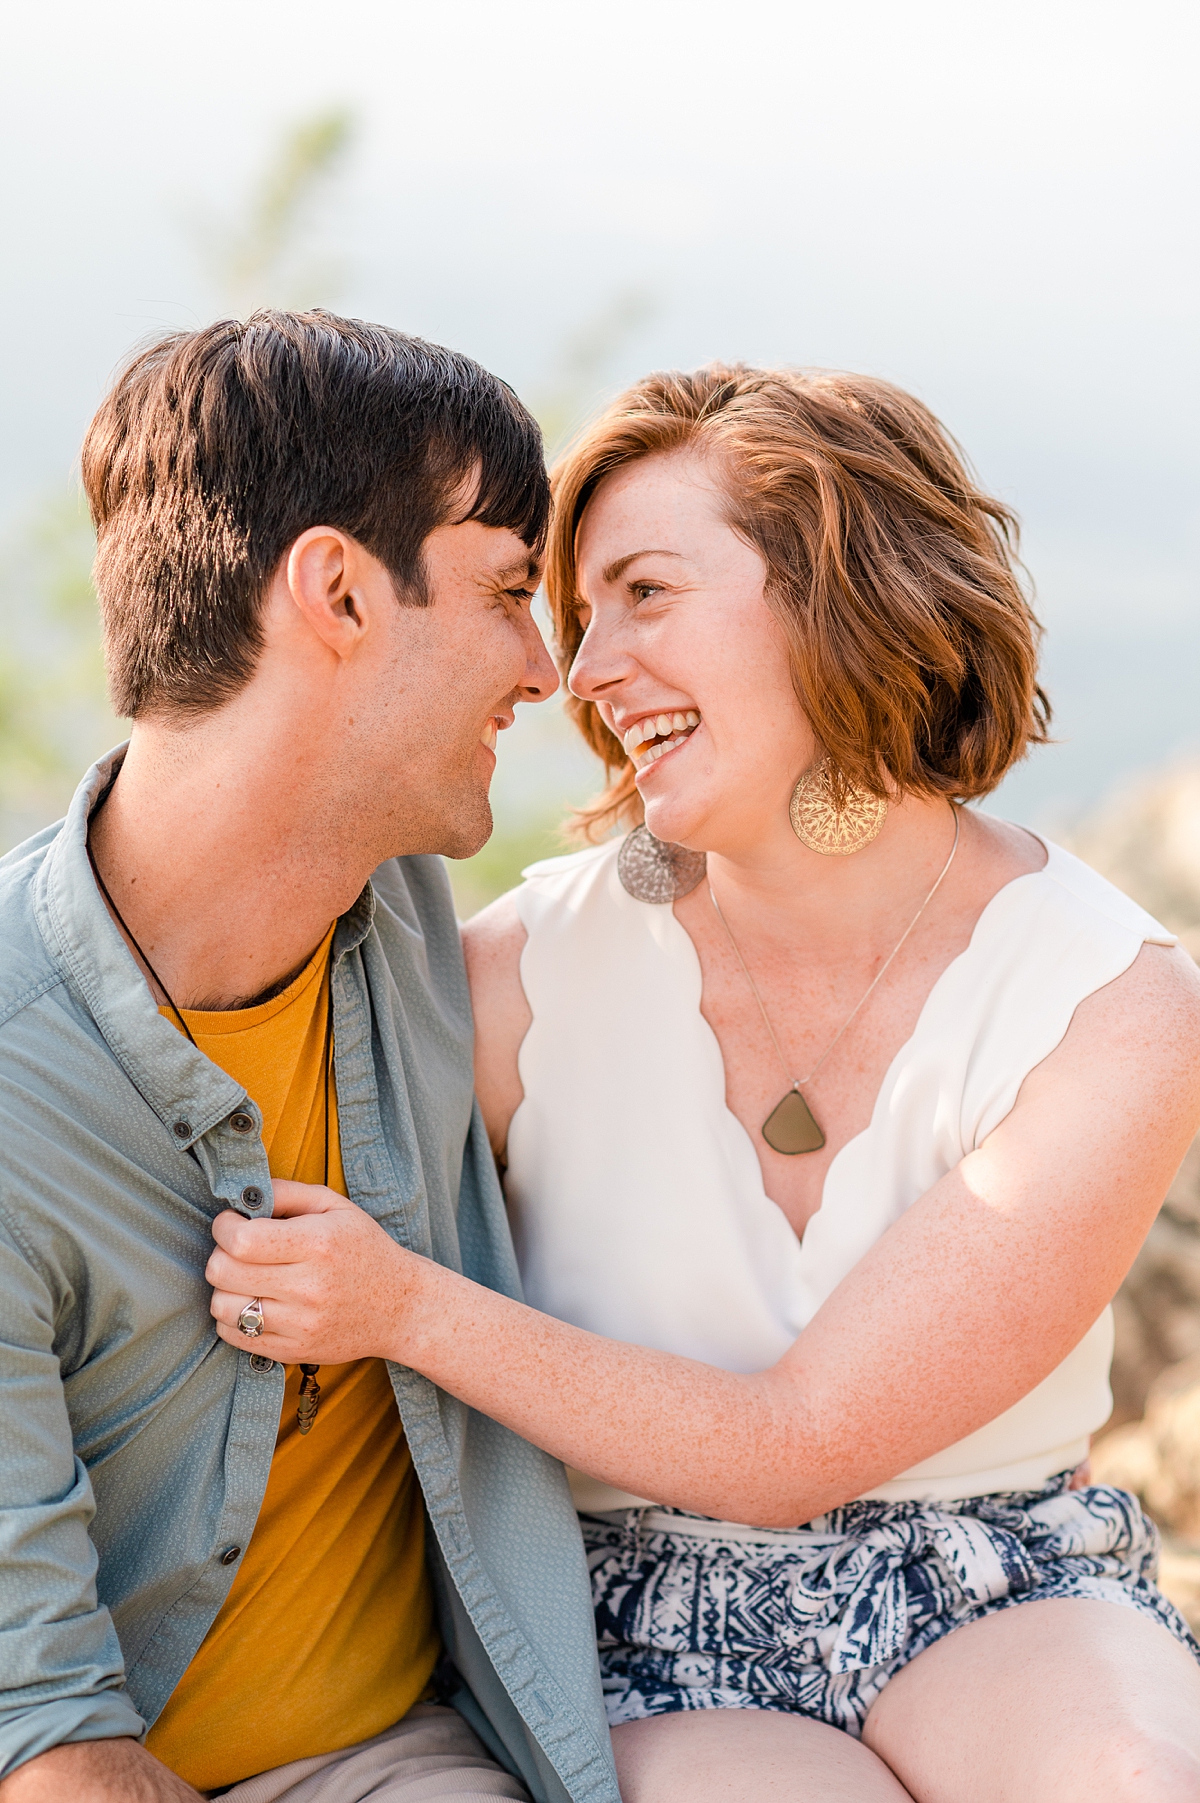 Big Smiles and Big Sky at Raven's Roost Overlook Engagement Session by Kailey Brianne Photography 